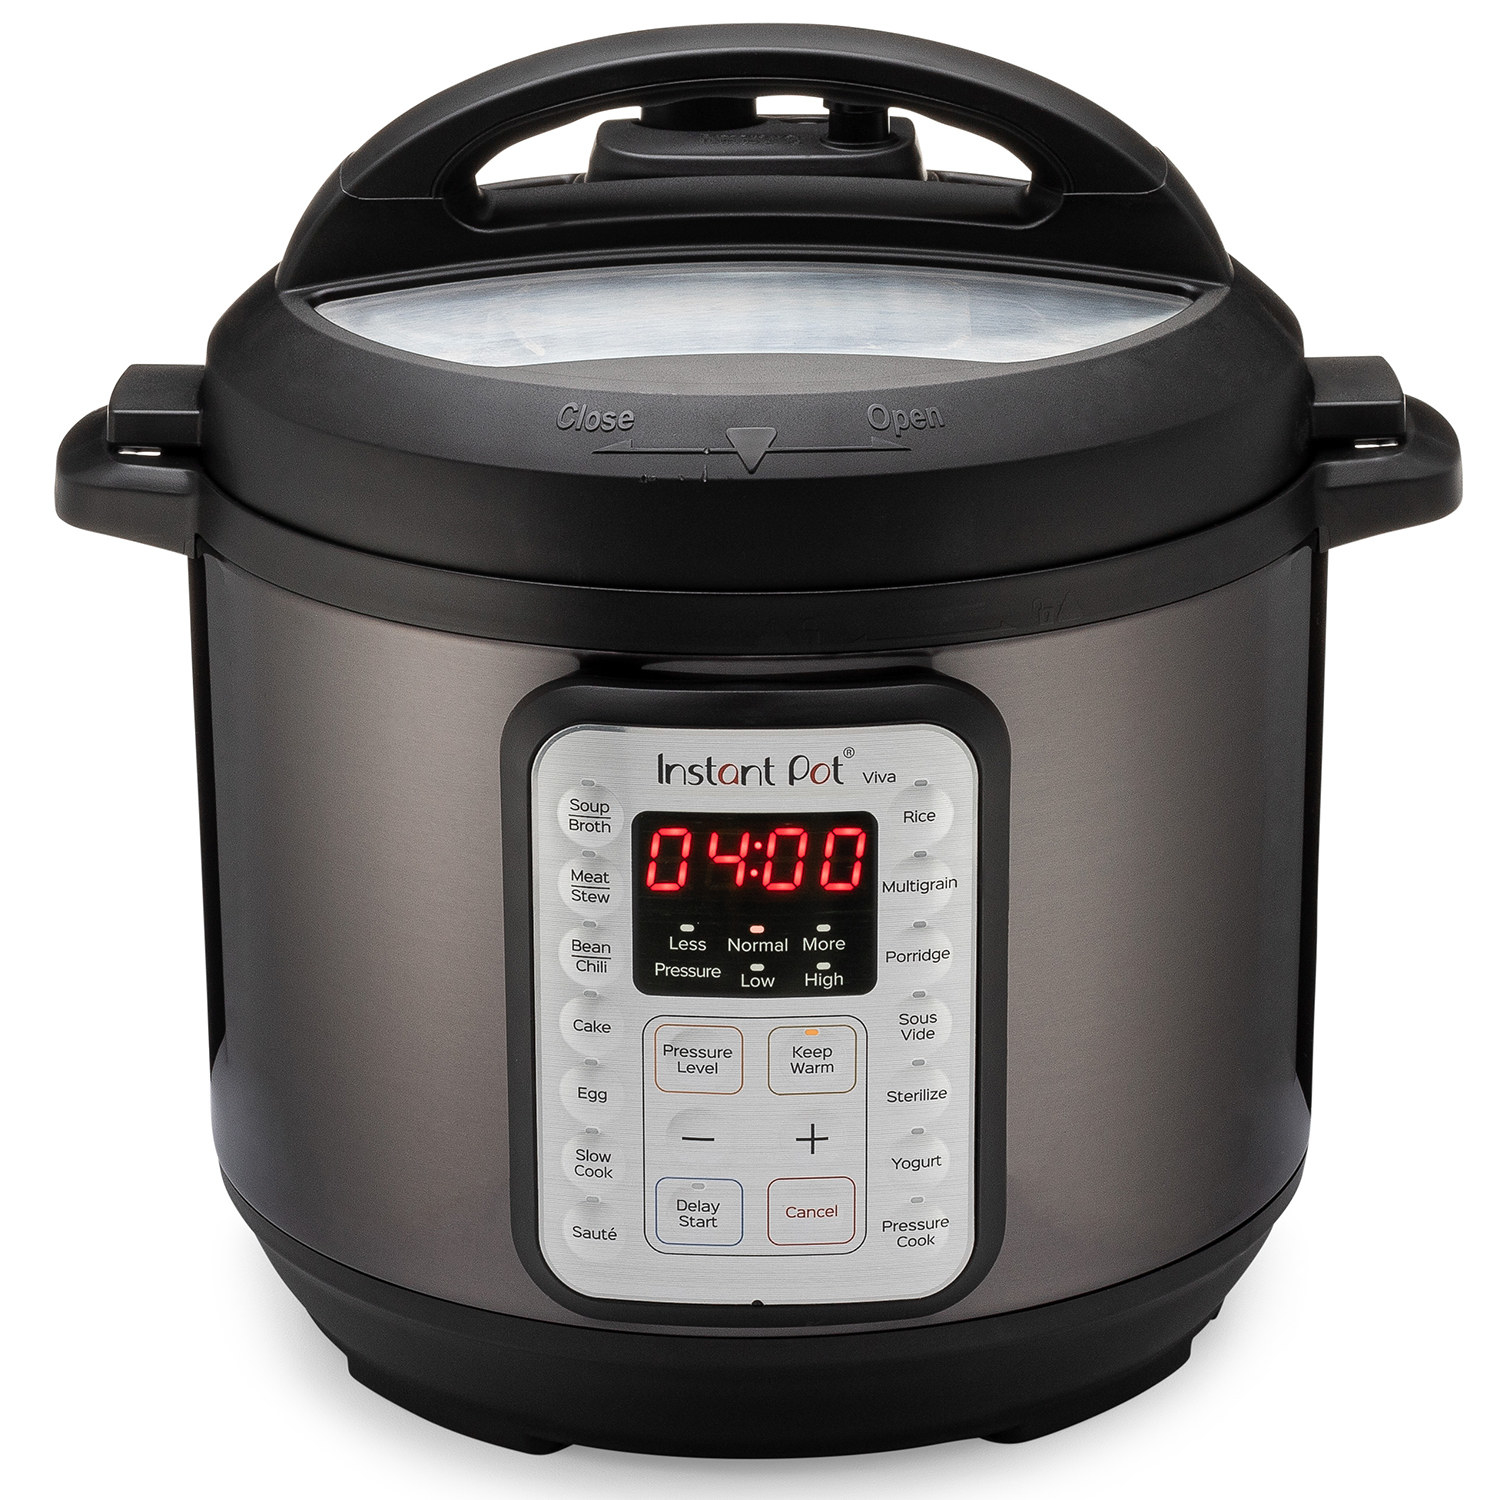 The Instant Pot, which has settings buttons on the front and is a brushed-gray metal color